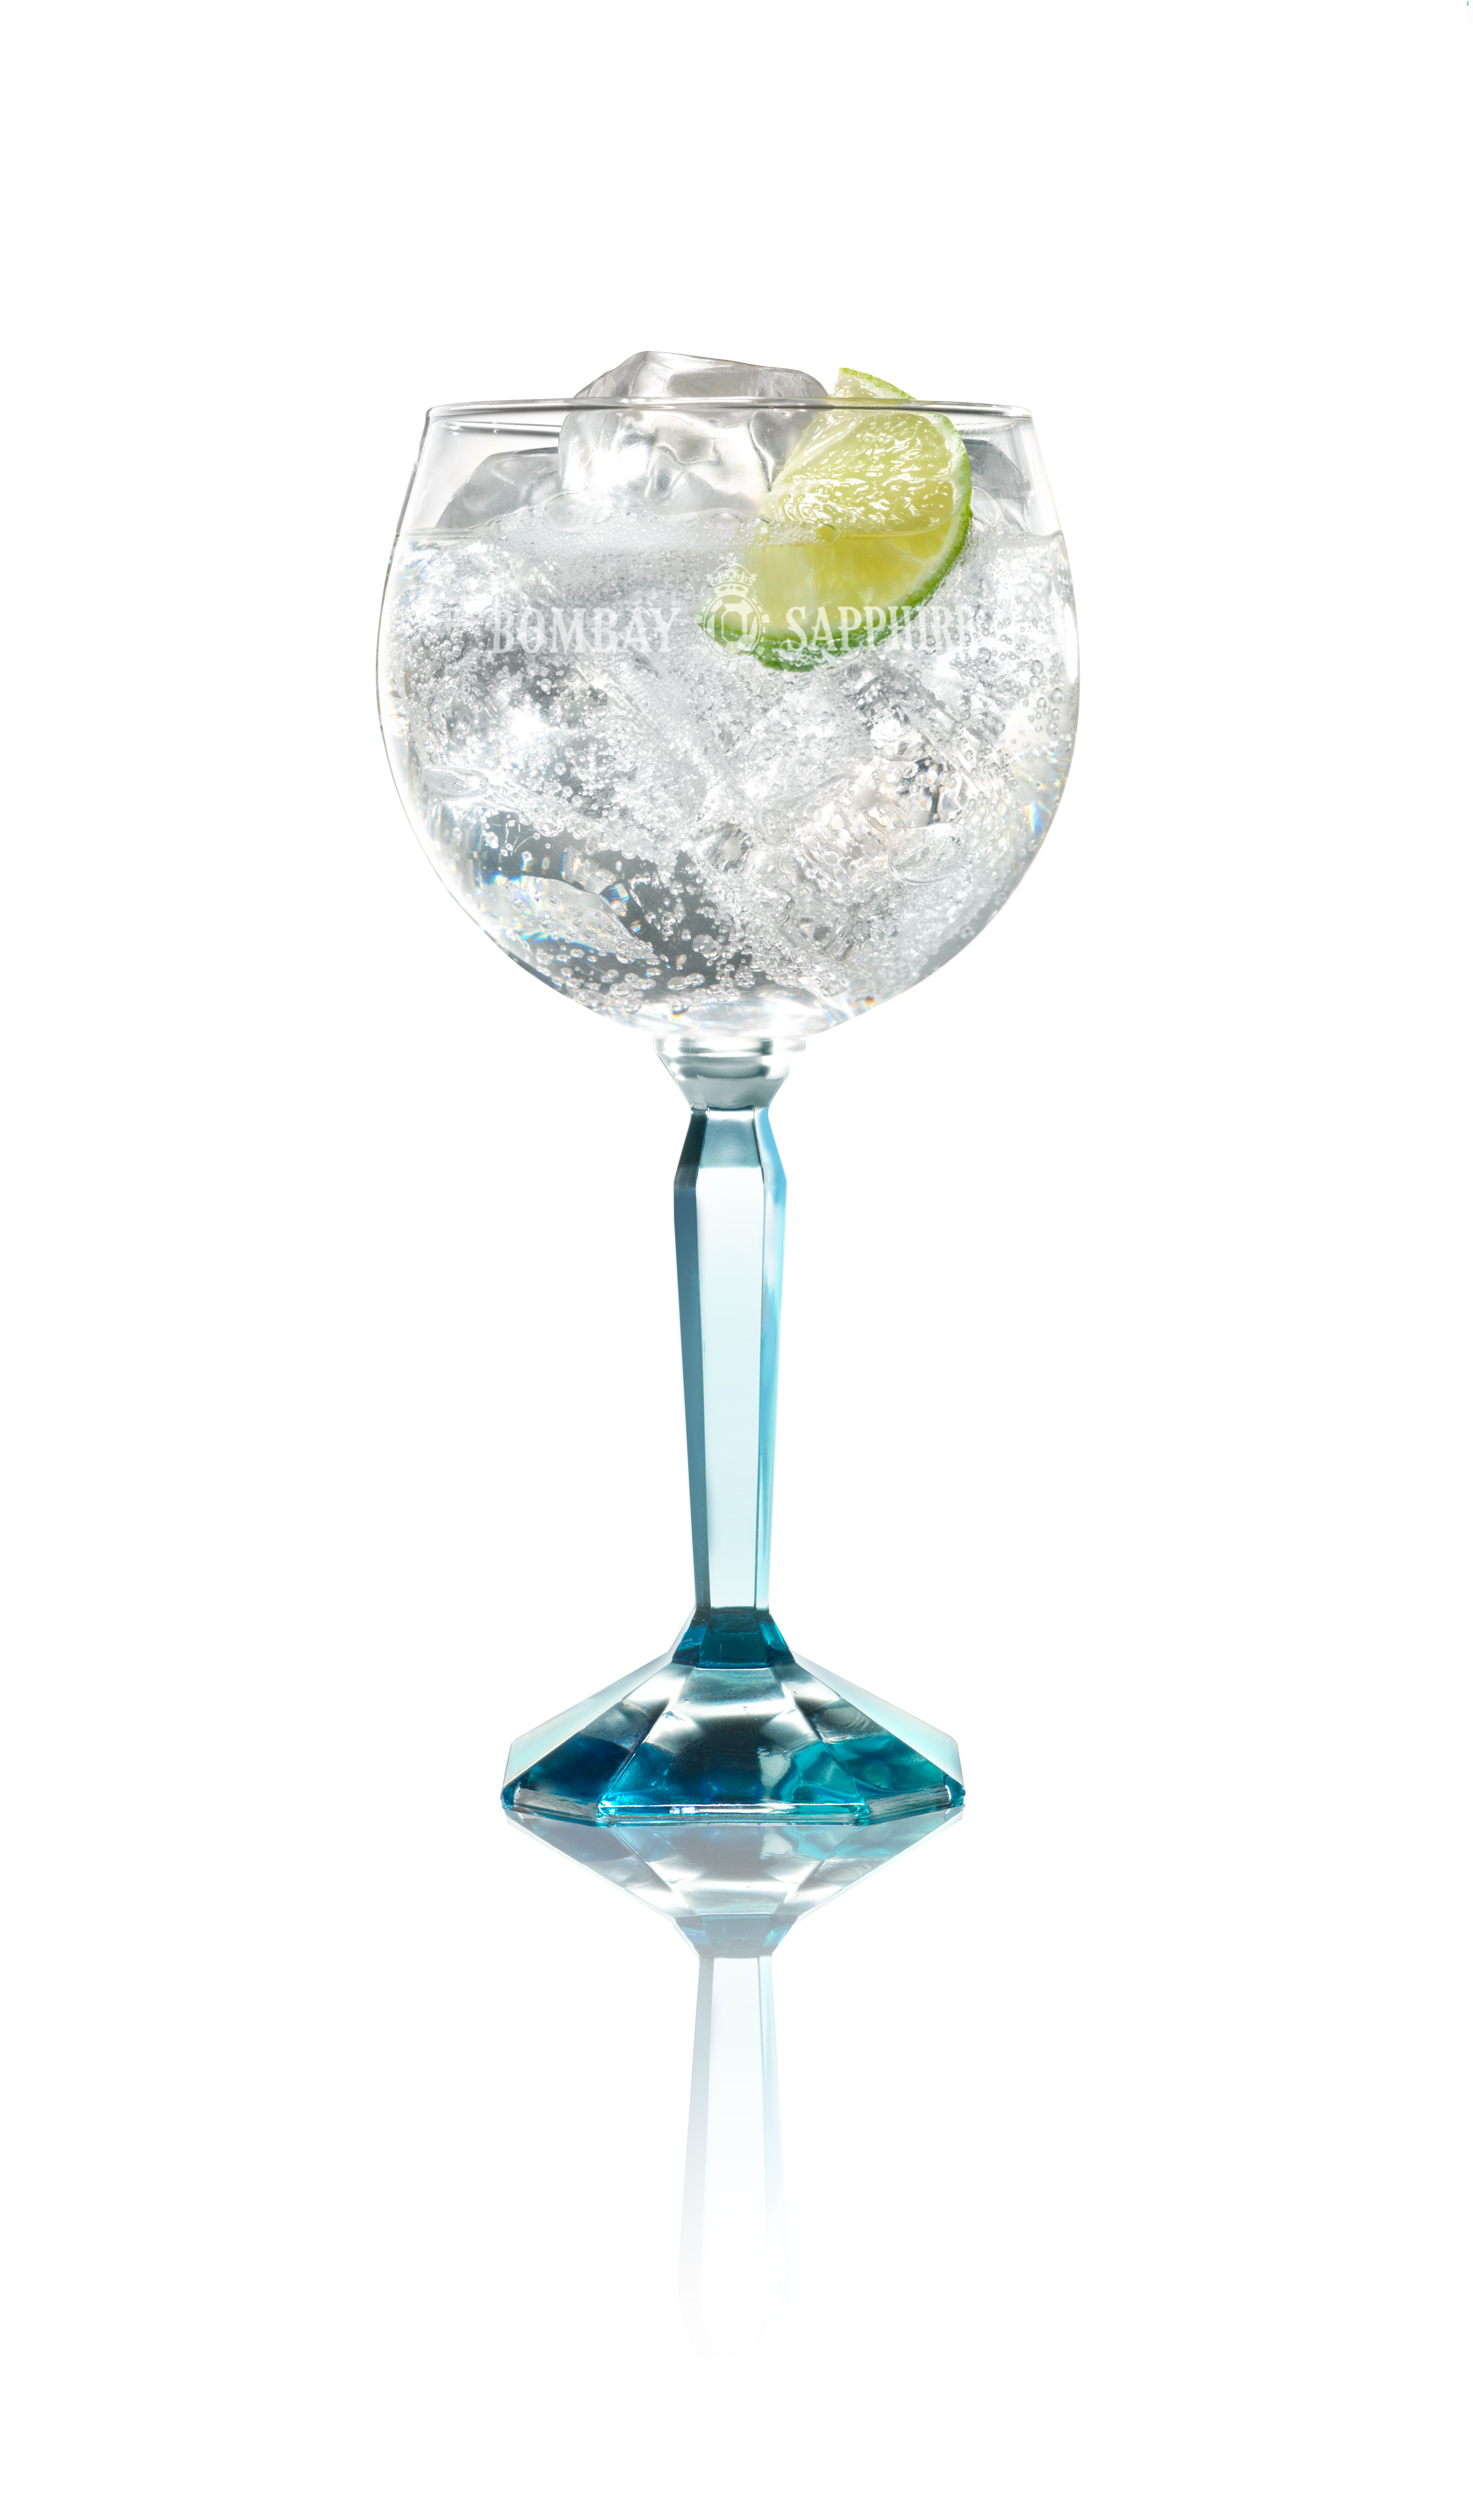 Bombay Sapphire and Tonic Cocktail